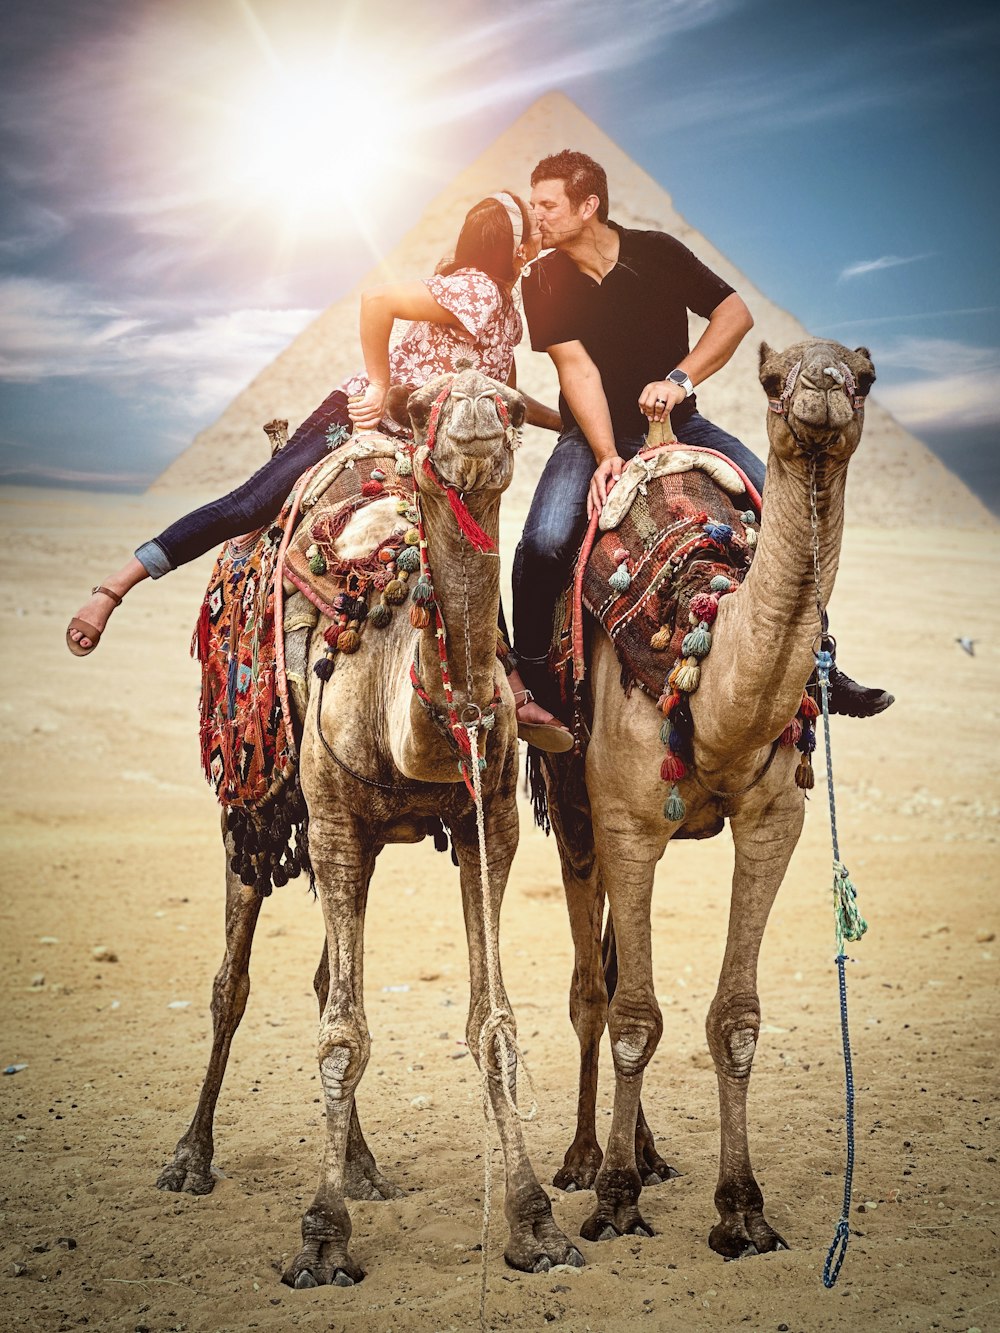 a man and a woman riding on the back of a camel